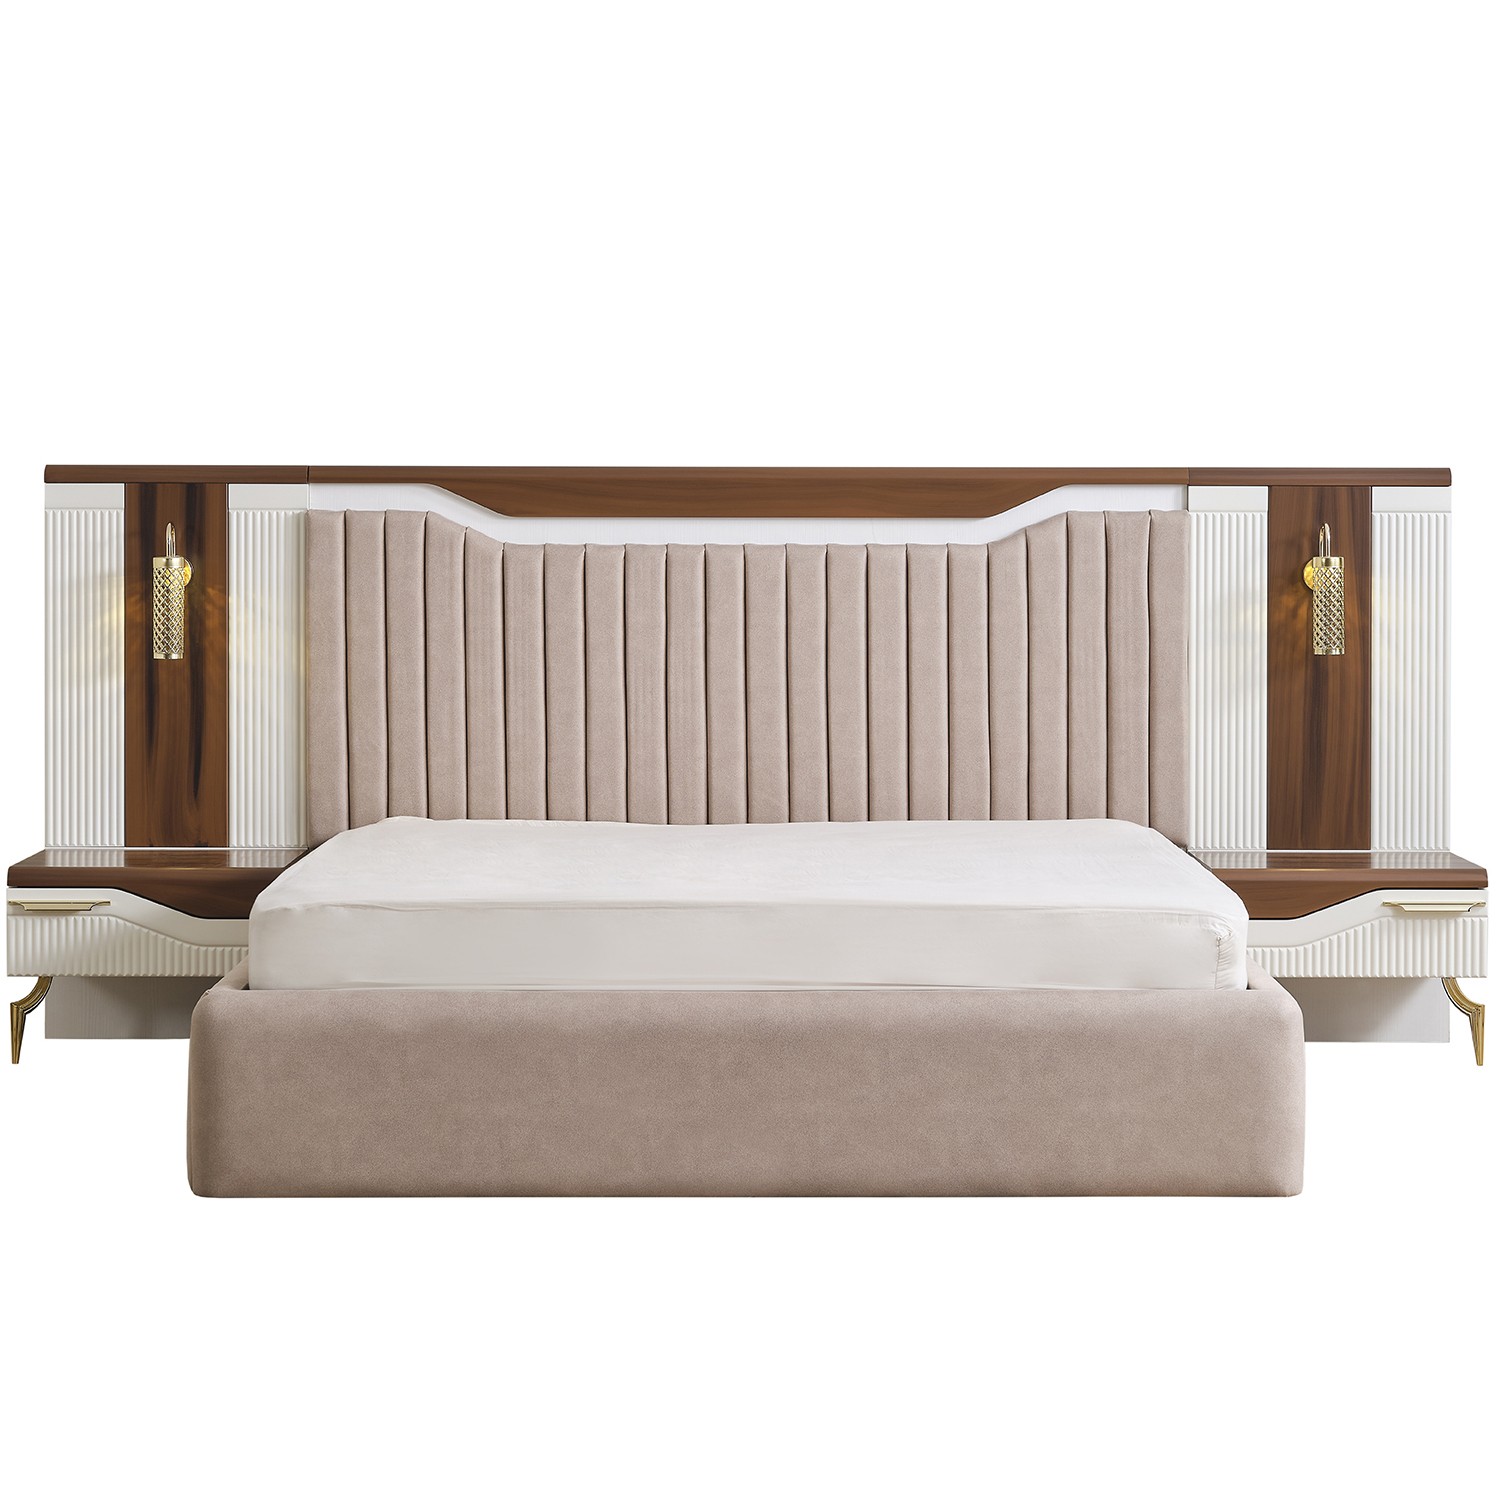 Style Hermes Vol1 Bed With Storage 180x200 cm